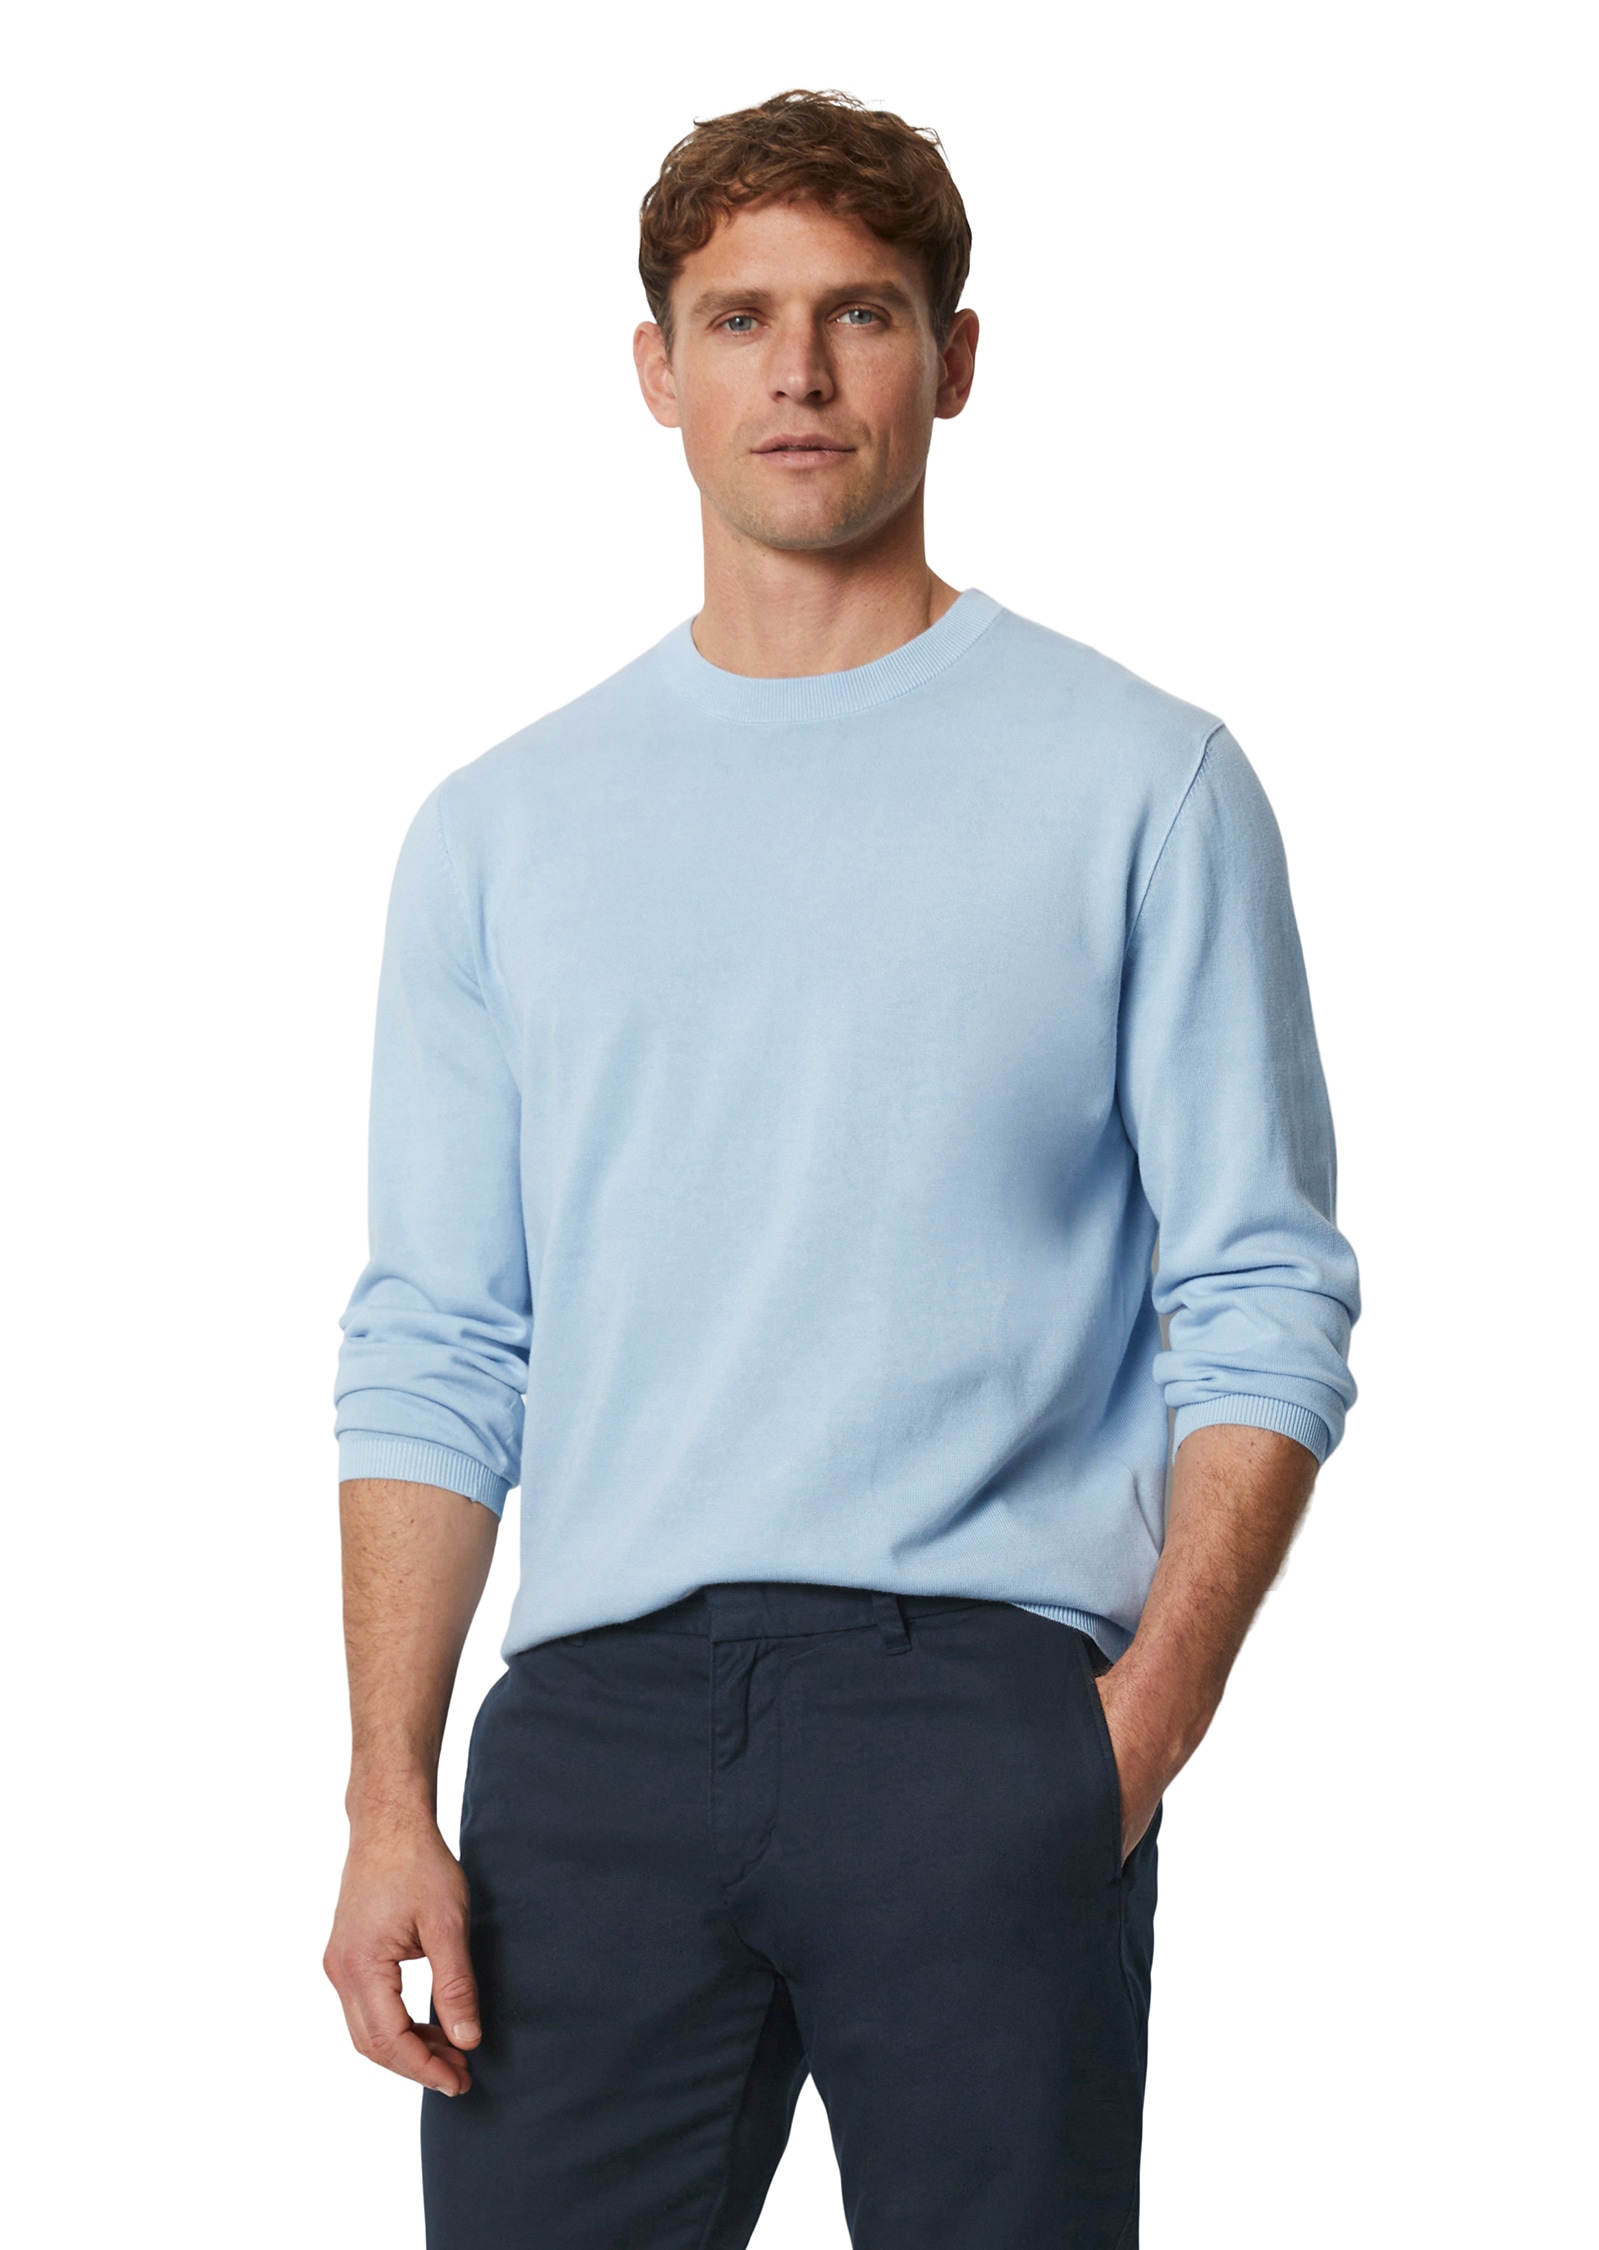 Marc O'Polo Rundhalspullover, in cleaner Basic-Form